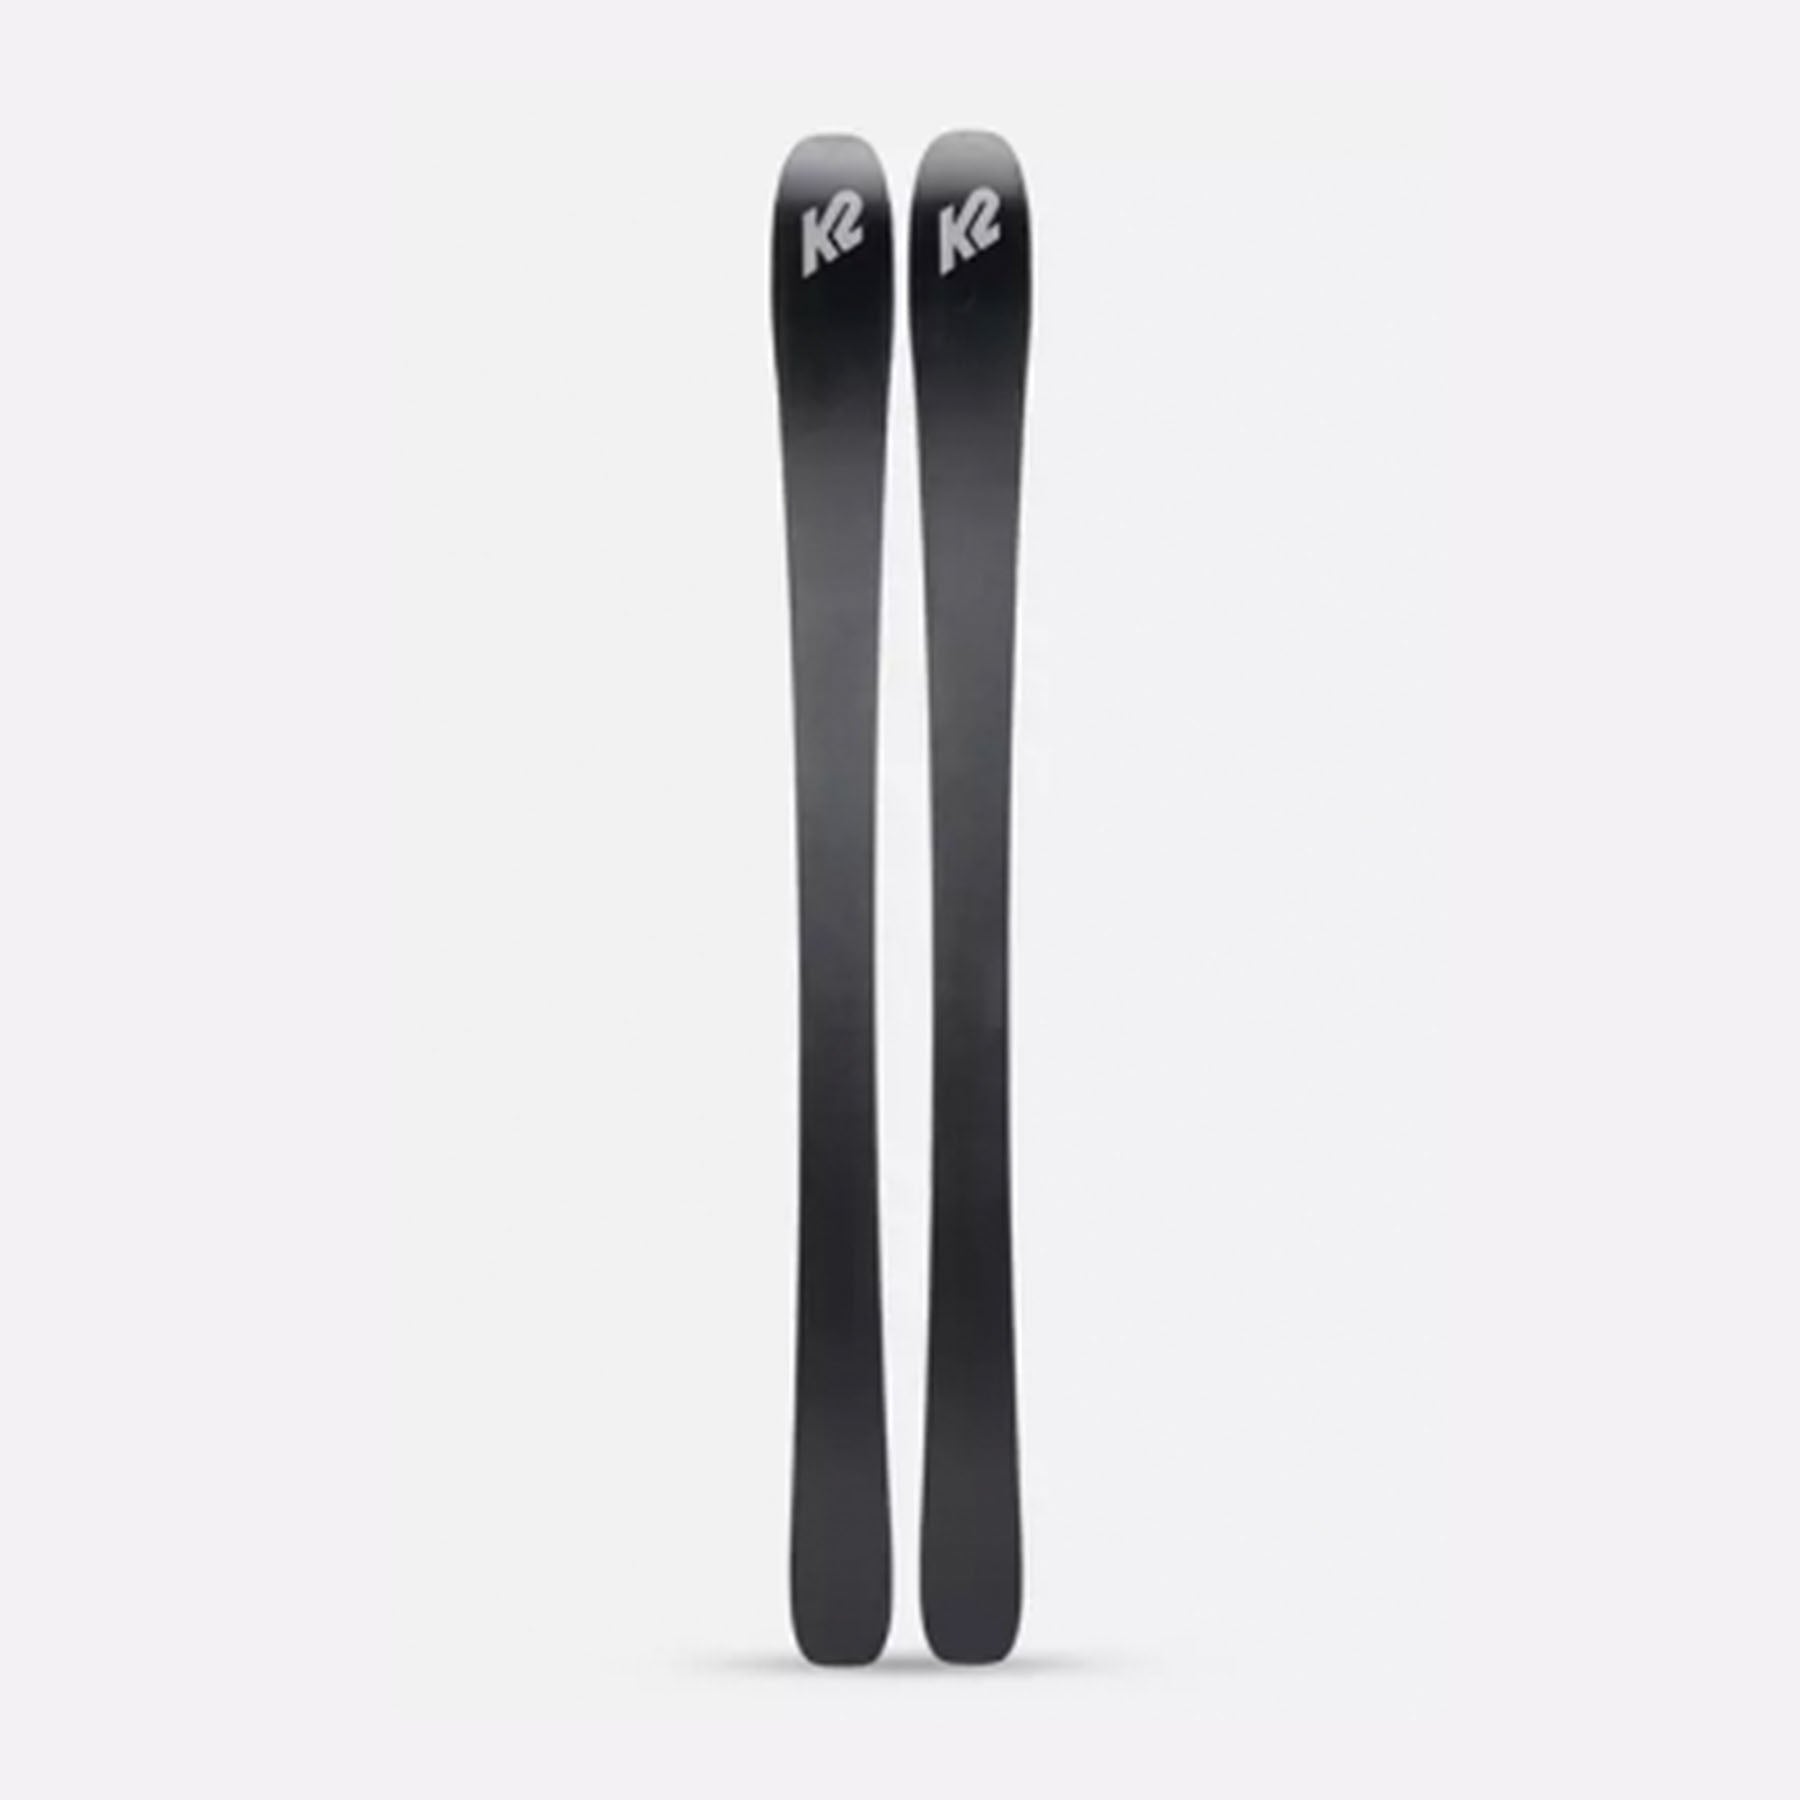 Image features the bottom of the Women's K2 Mindbender 85 skis in black with white K2 logos on the tips.